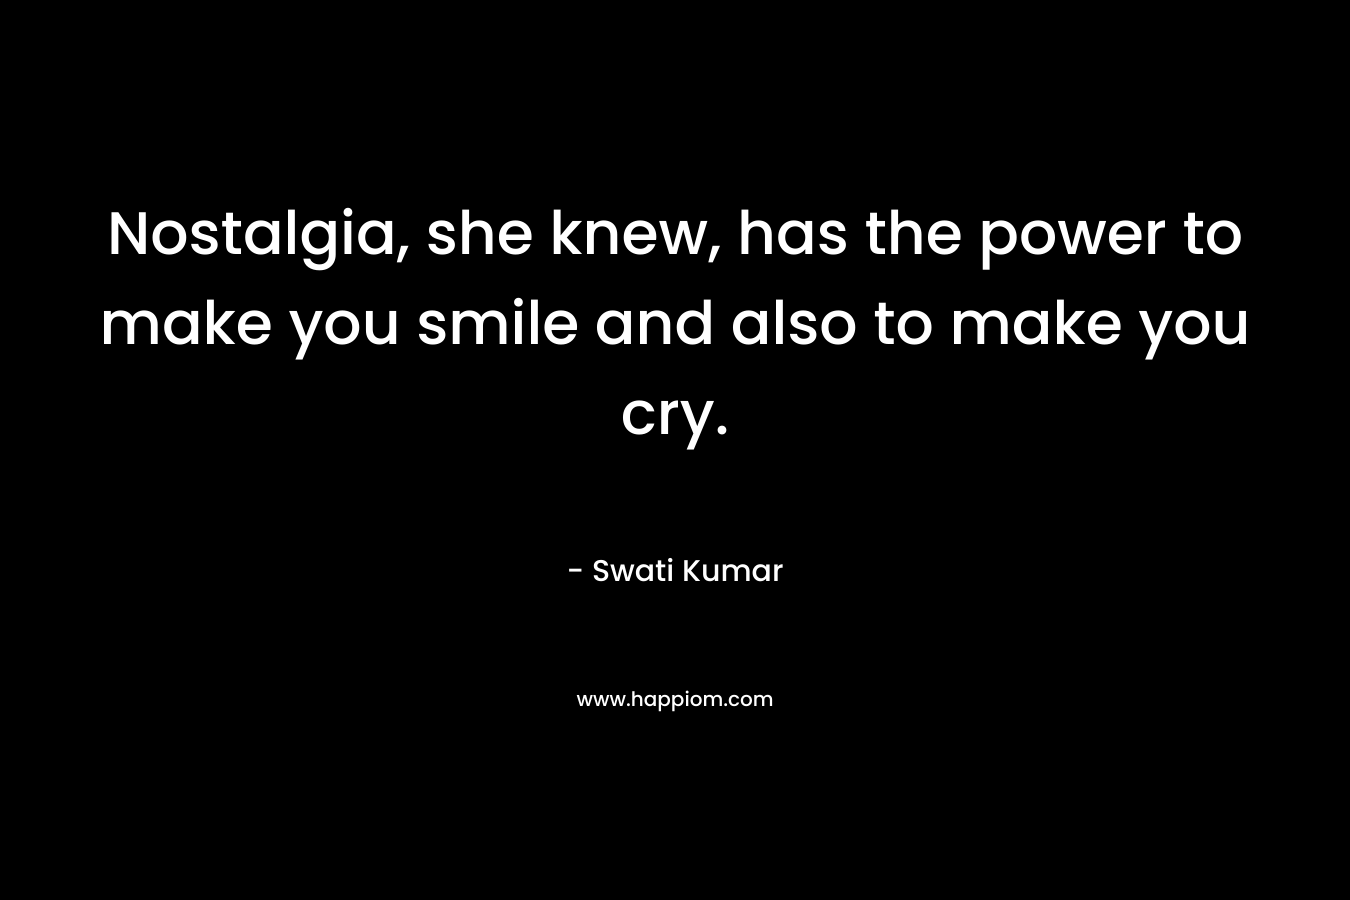 Nostalgia, she knew, has the power to make you smile and also to make you cry. – Swati Kumar